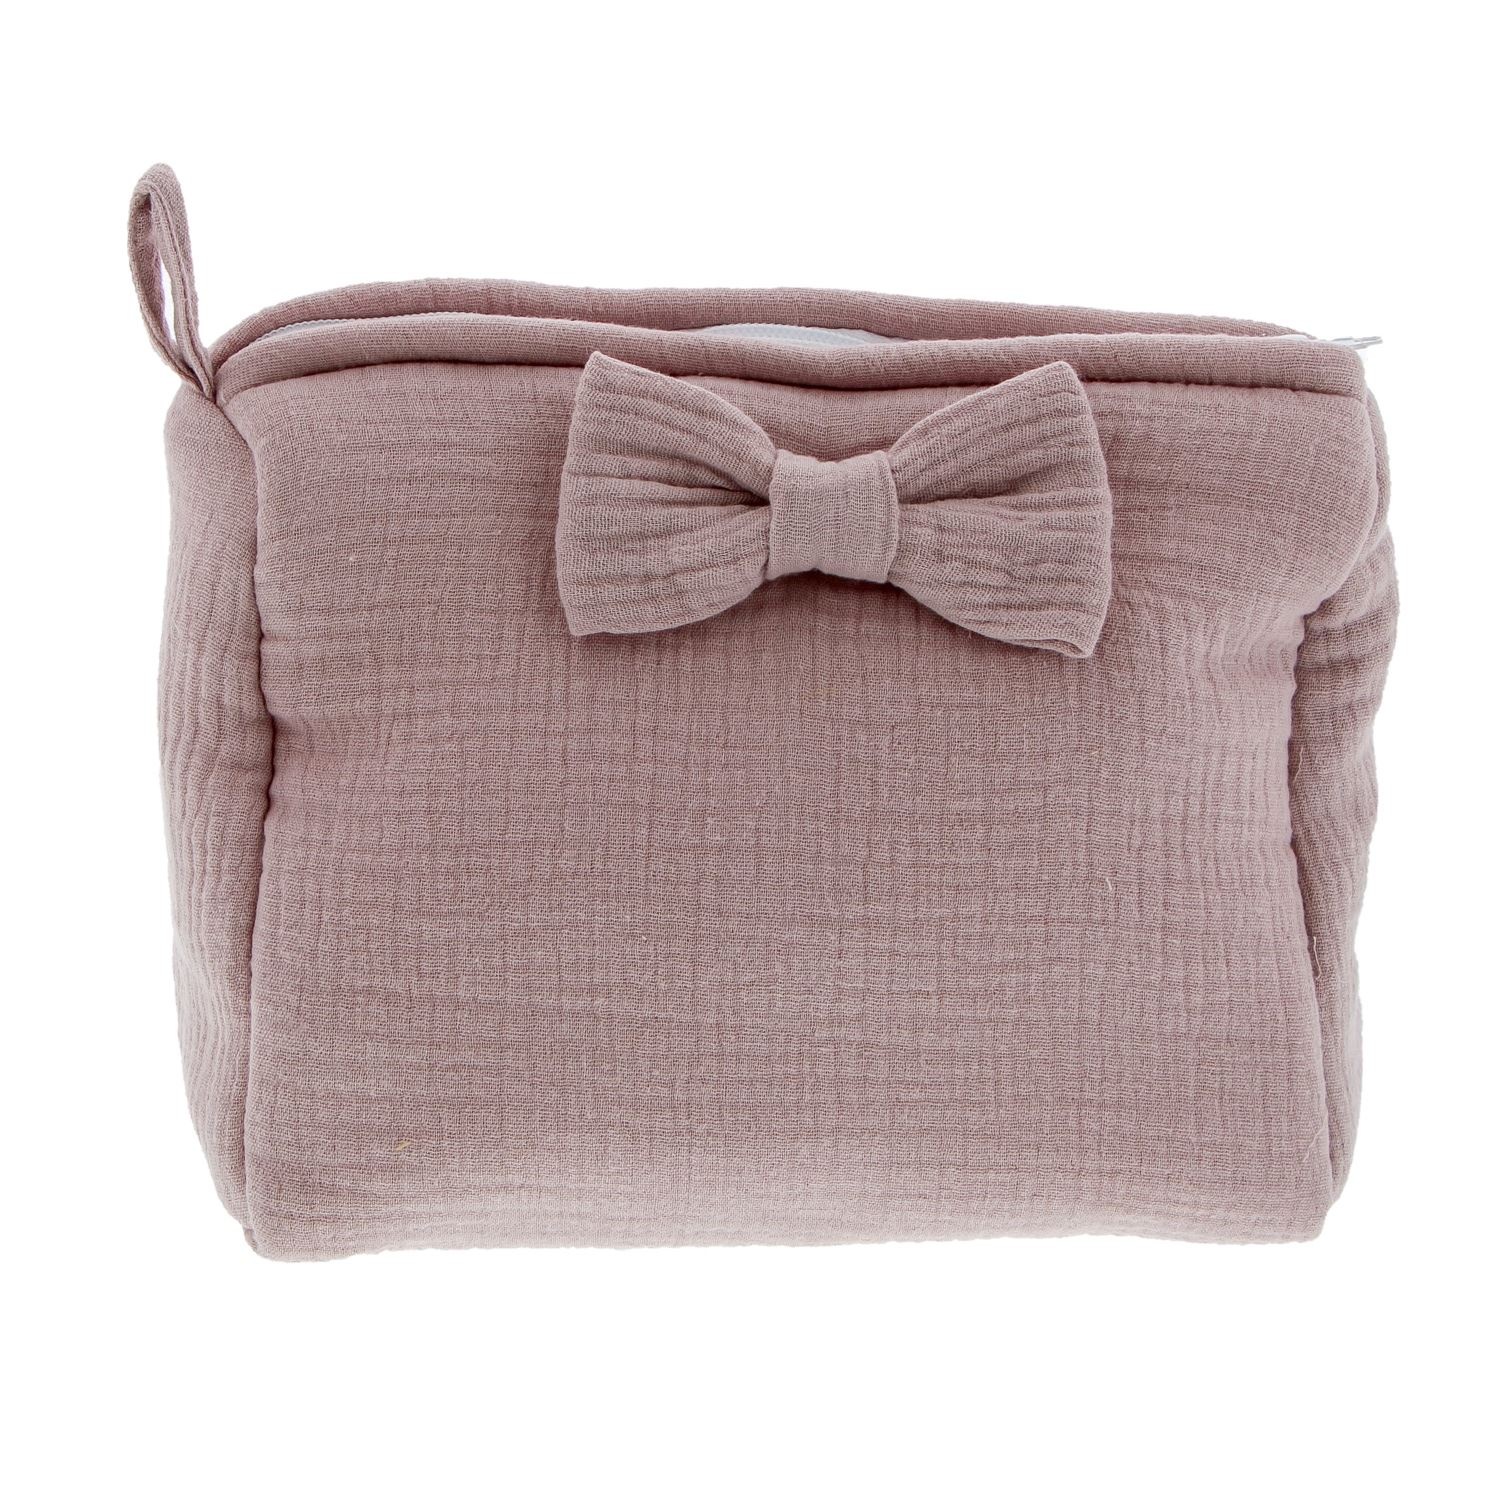 "Tetra" toiletry bag with bow - sea fog - 260*90*200 mm - 2 pieces